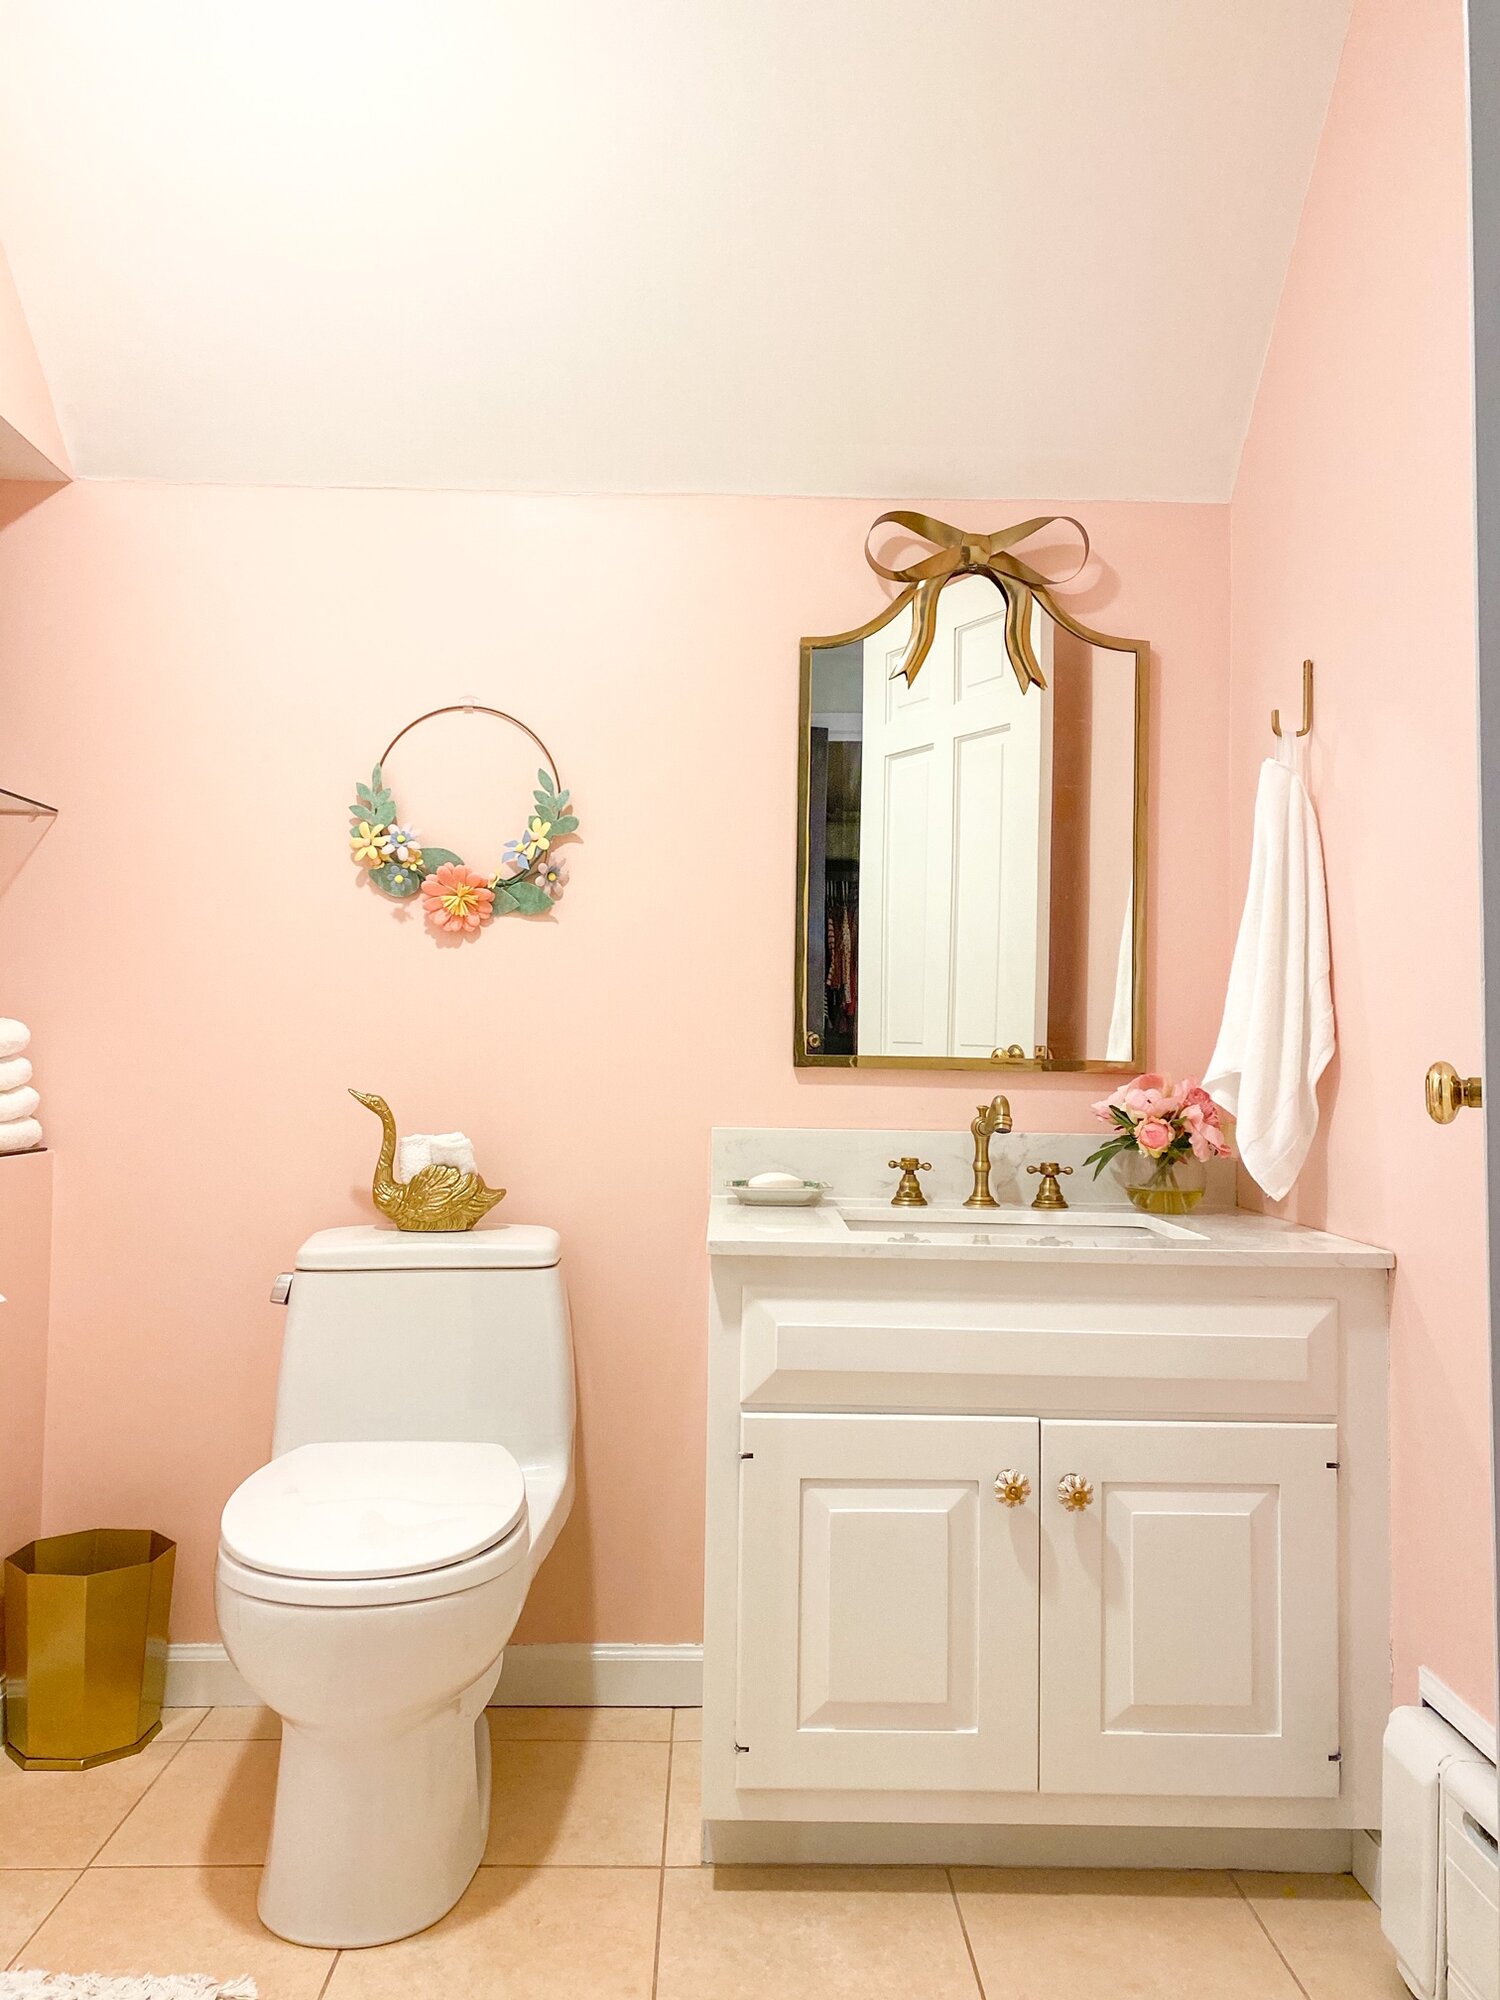 50+ BEST Bathroom Decorating Ideas on a Budget - Of Life and Lisa